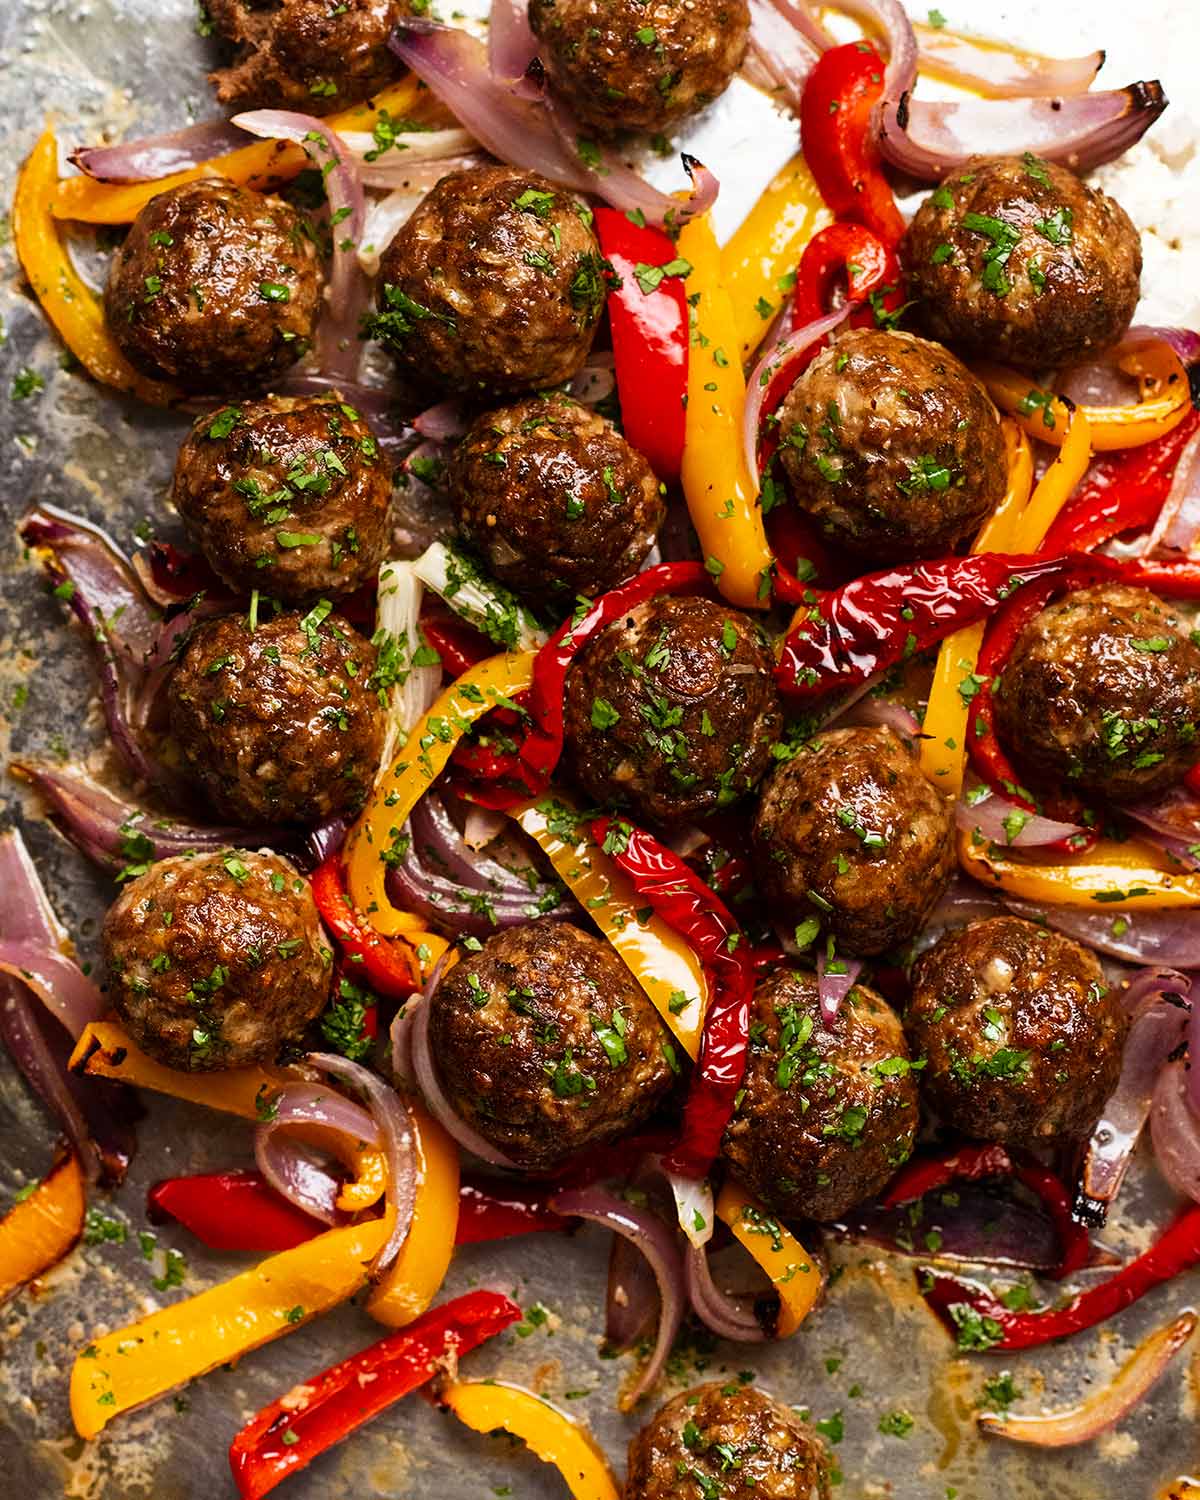 Baked lamb kofta meatballs and vegetables fresh out of the oven